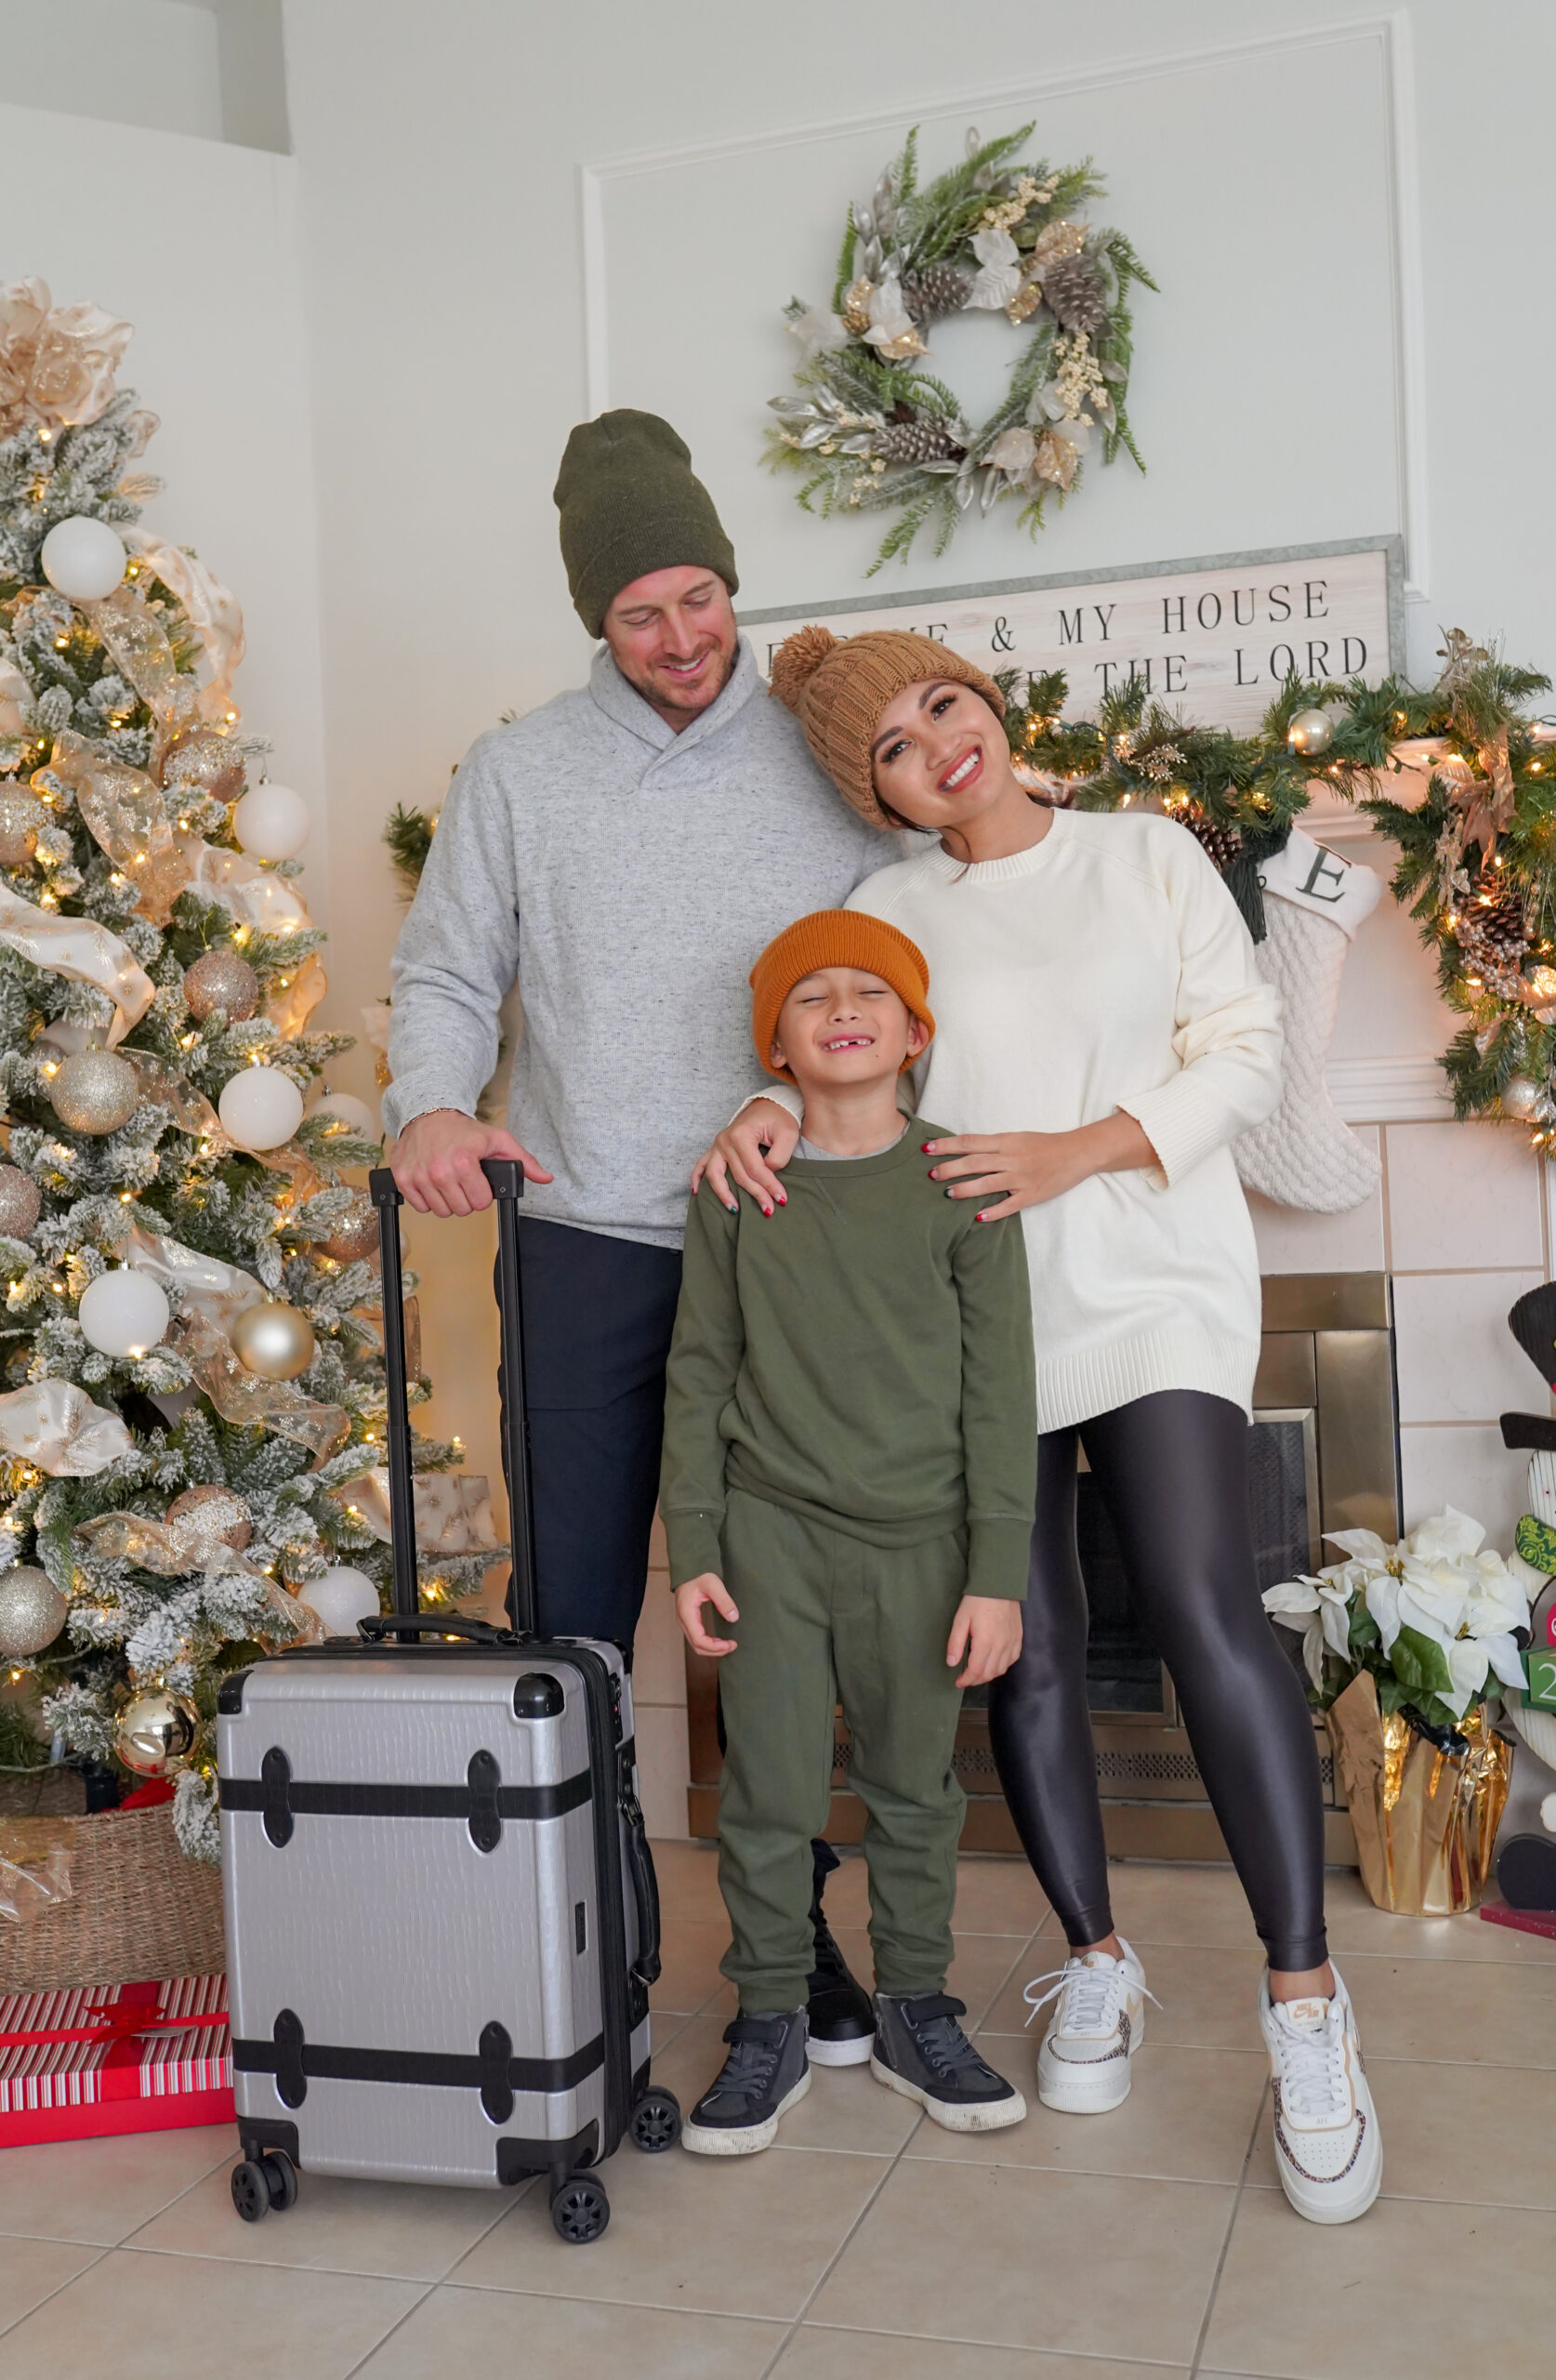 Family Travel Outfits. Walmart fashion, family style, family outfits, travel #ootd